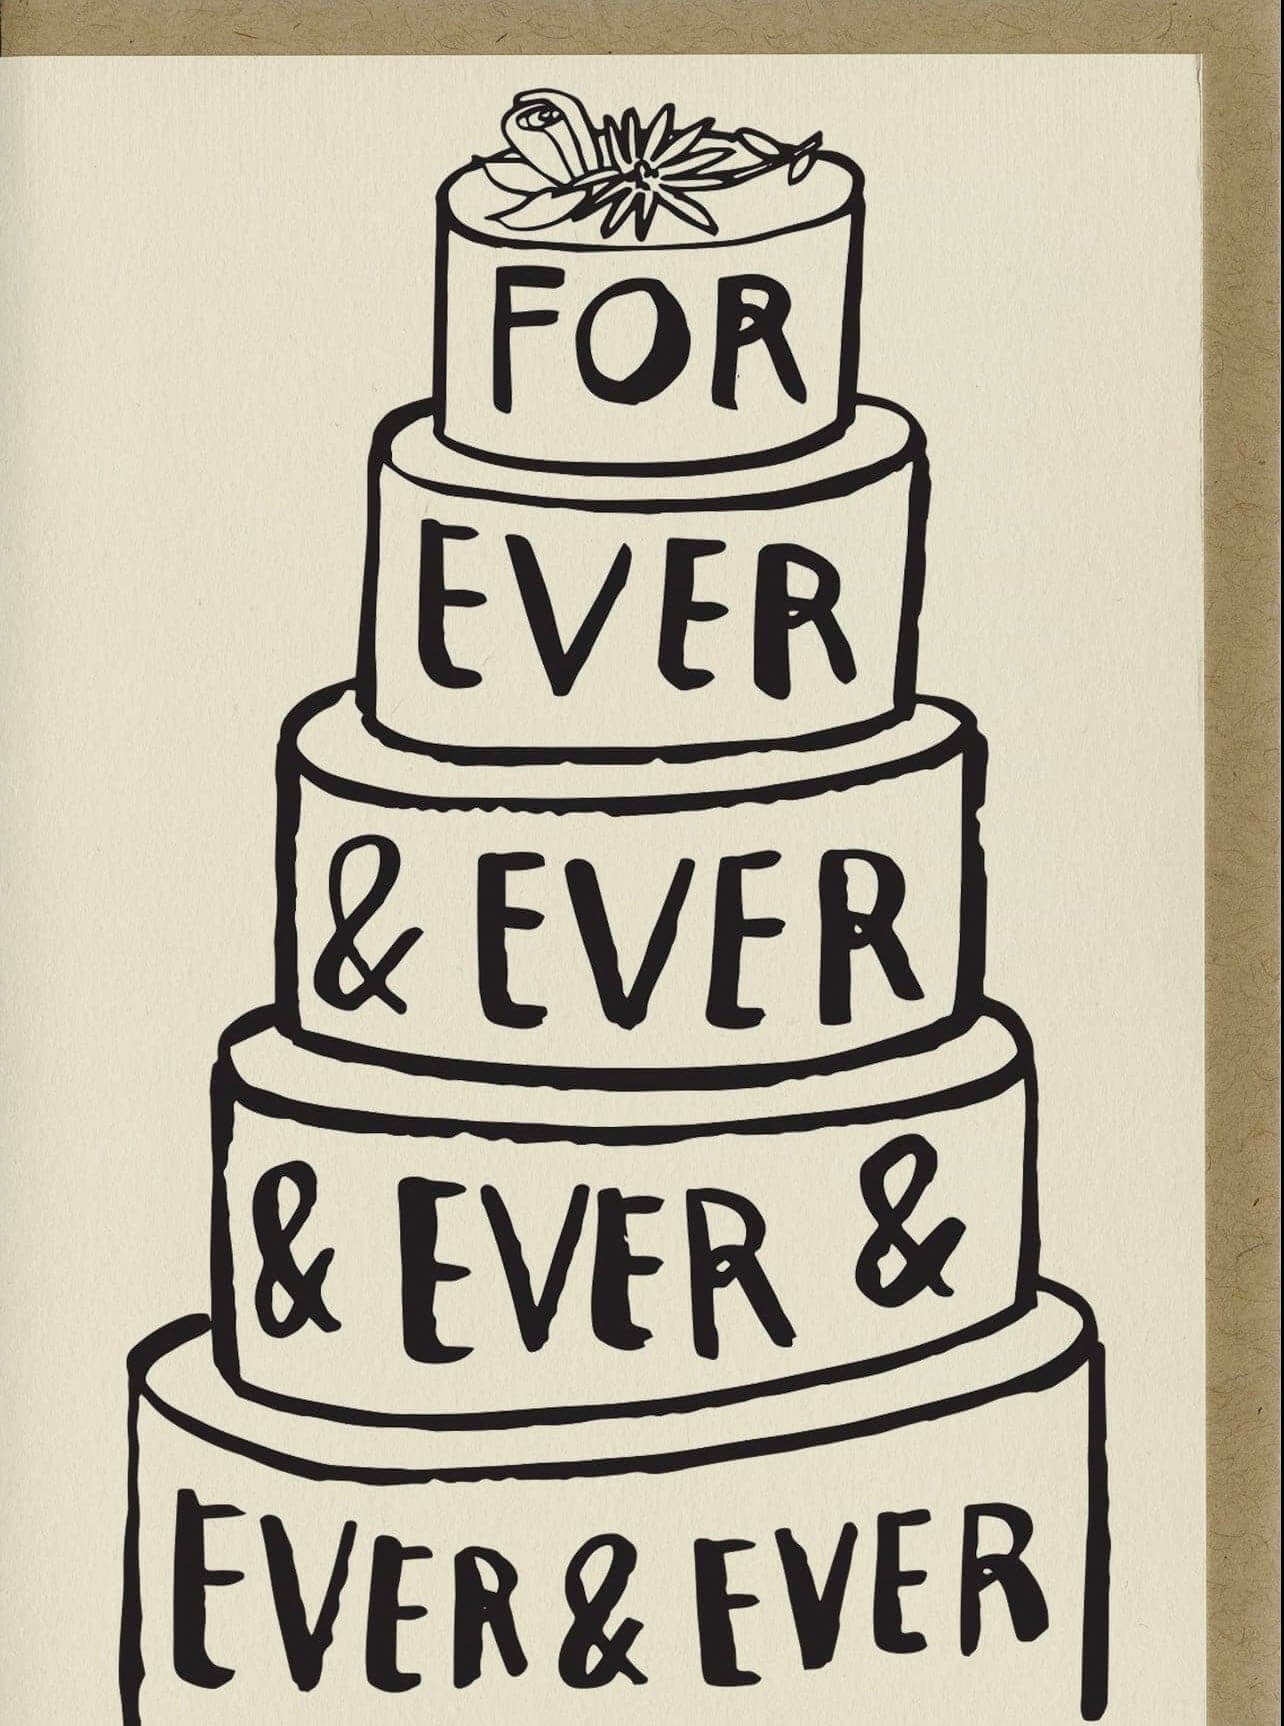 For ever & ever greeting card